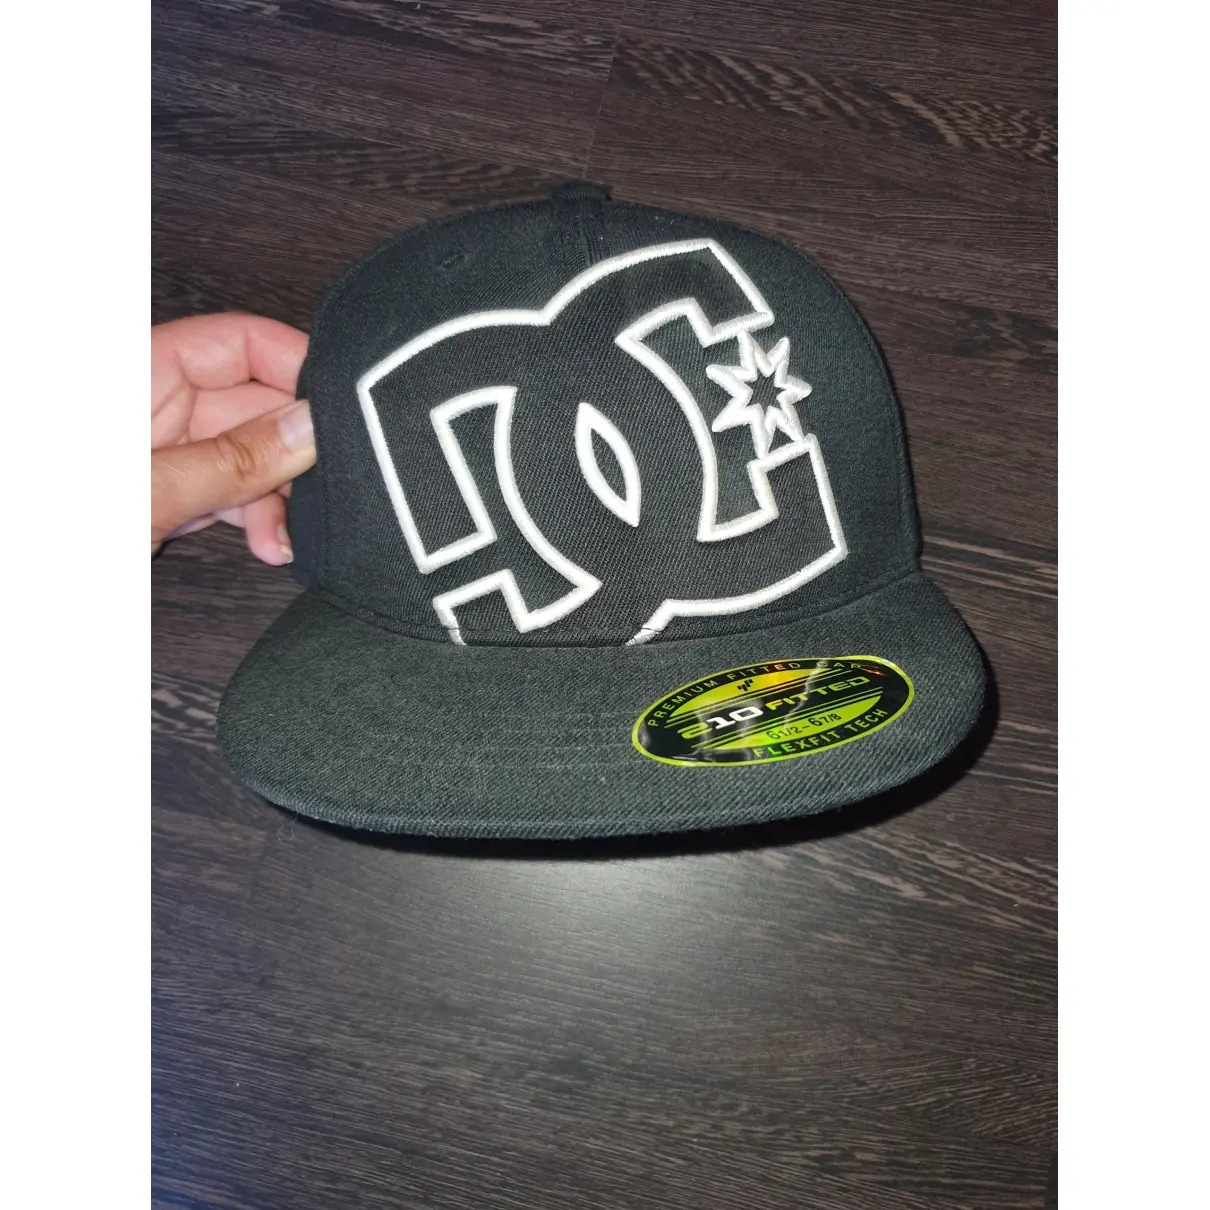 Luxury DC SHOES Hats & pull on hats Men